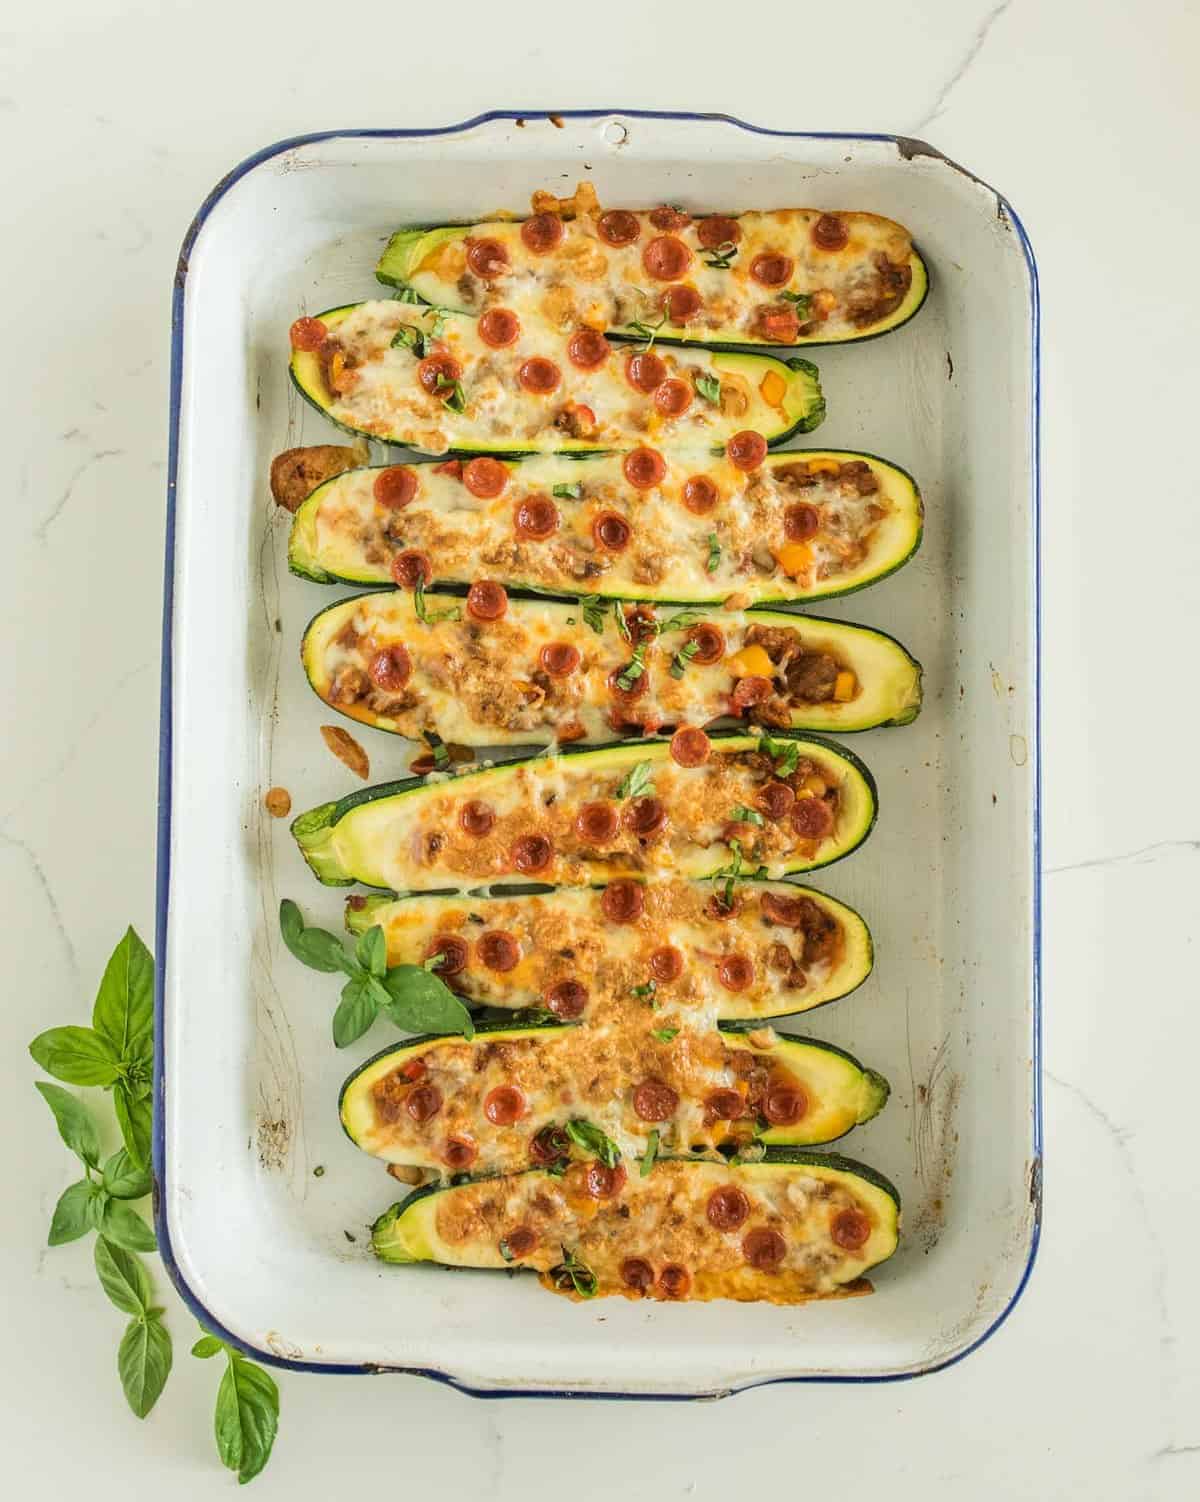 All the flavors of a supreme pizza turned into a stuffed zucchini, made with sausage, pepperoni, peppers, onions, cheese, and more. Done in less than 30 minutes.